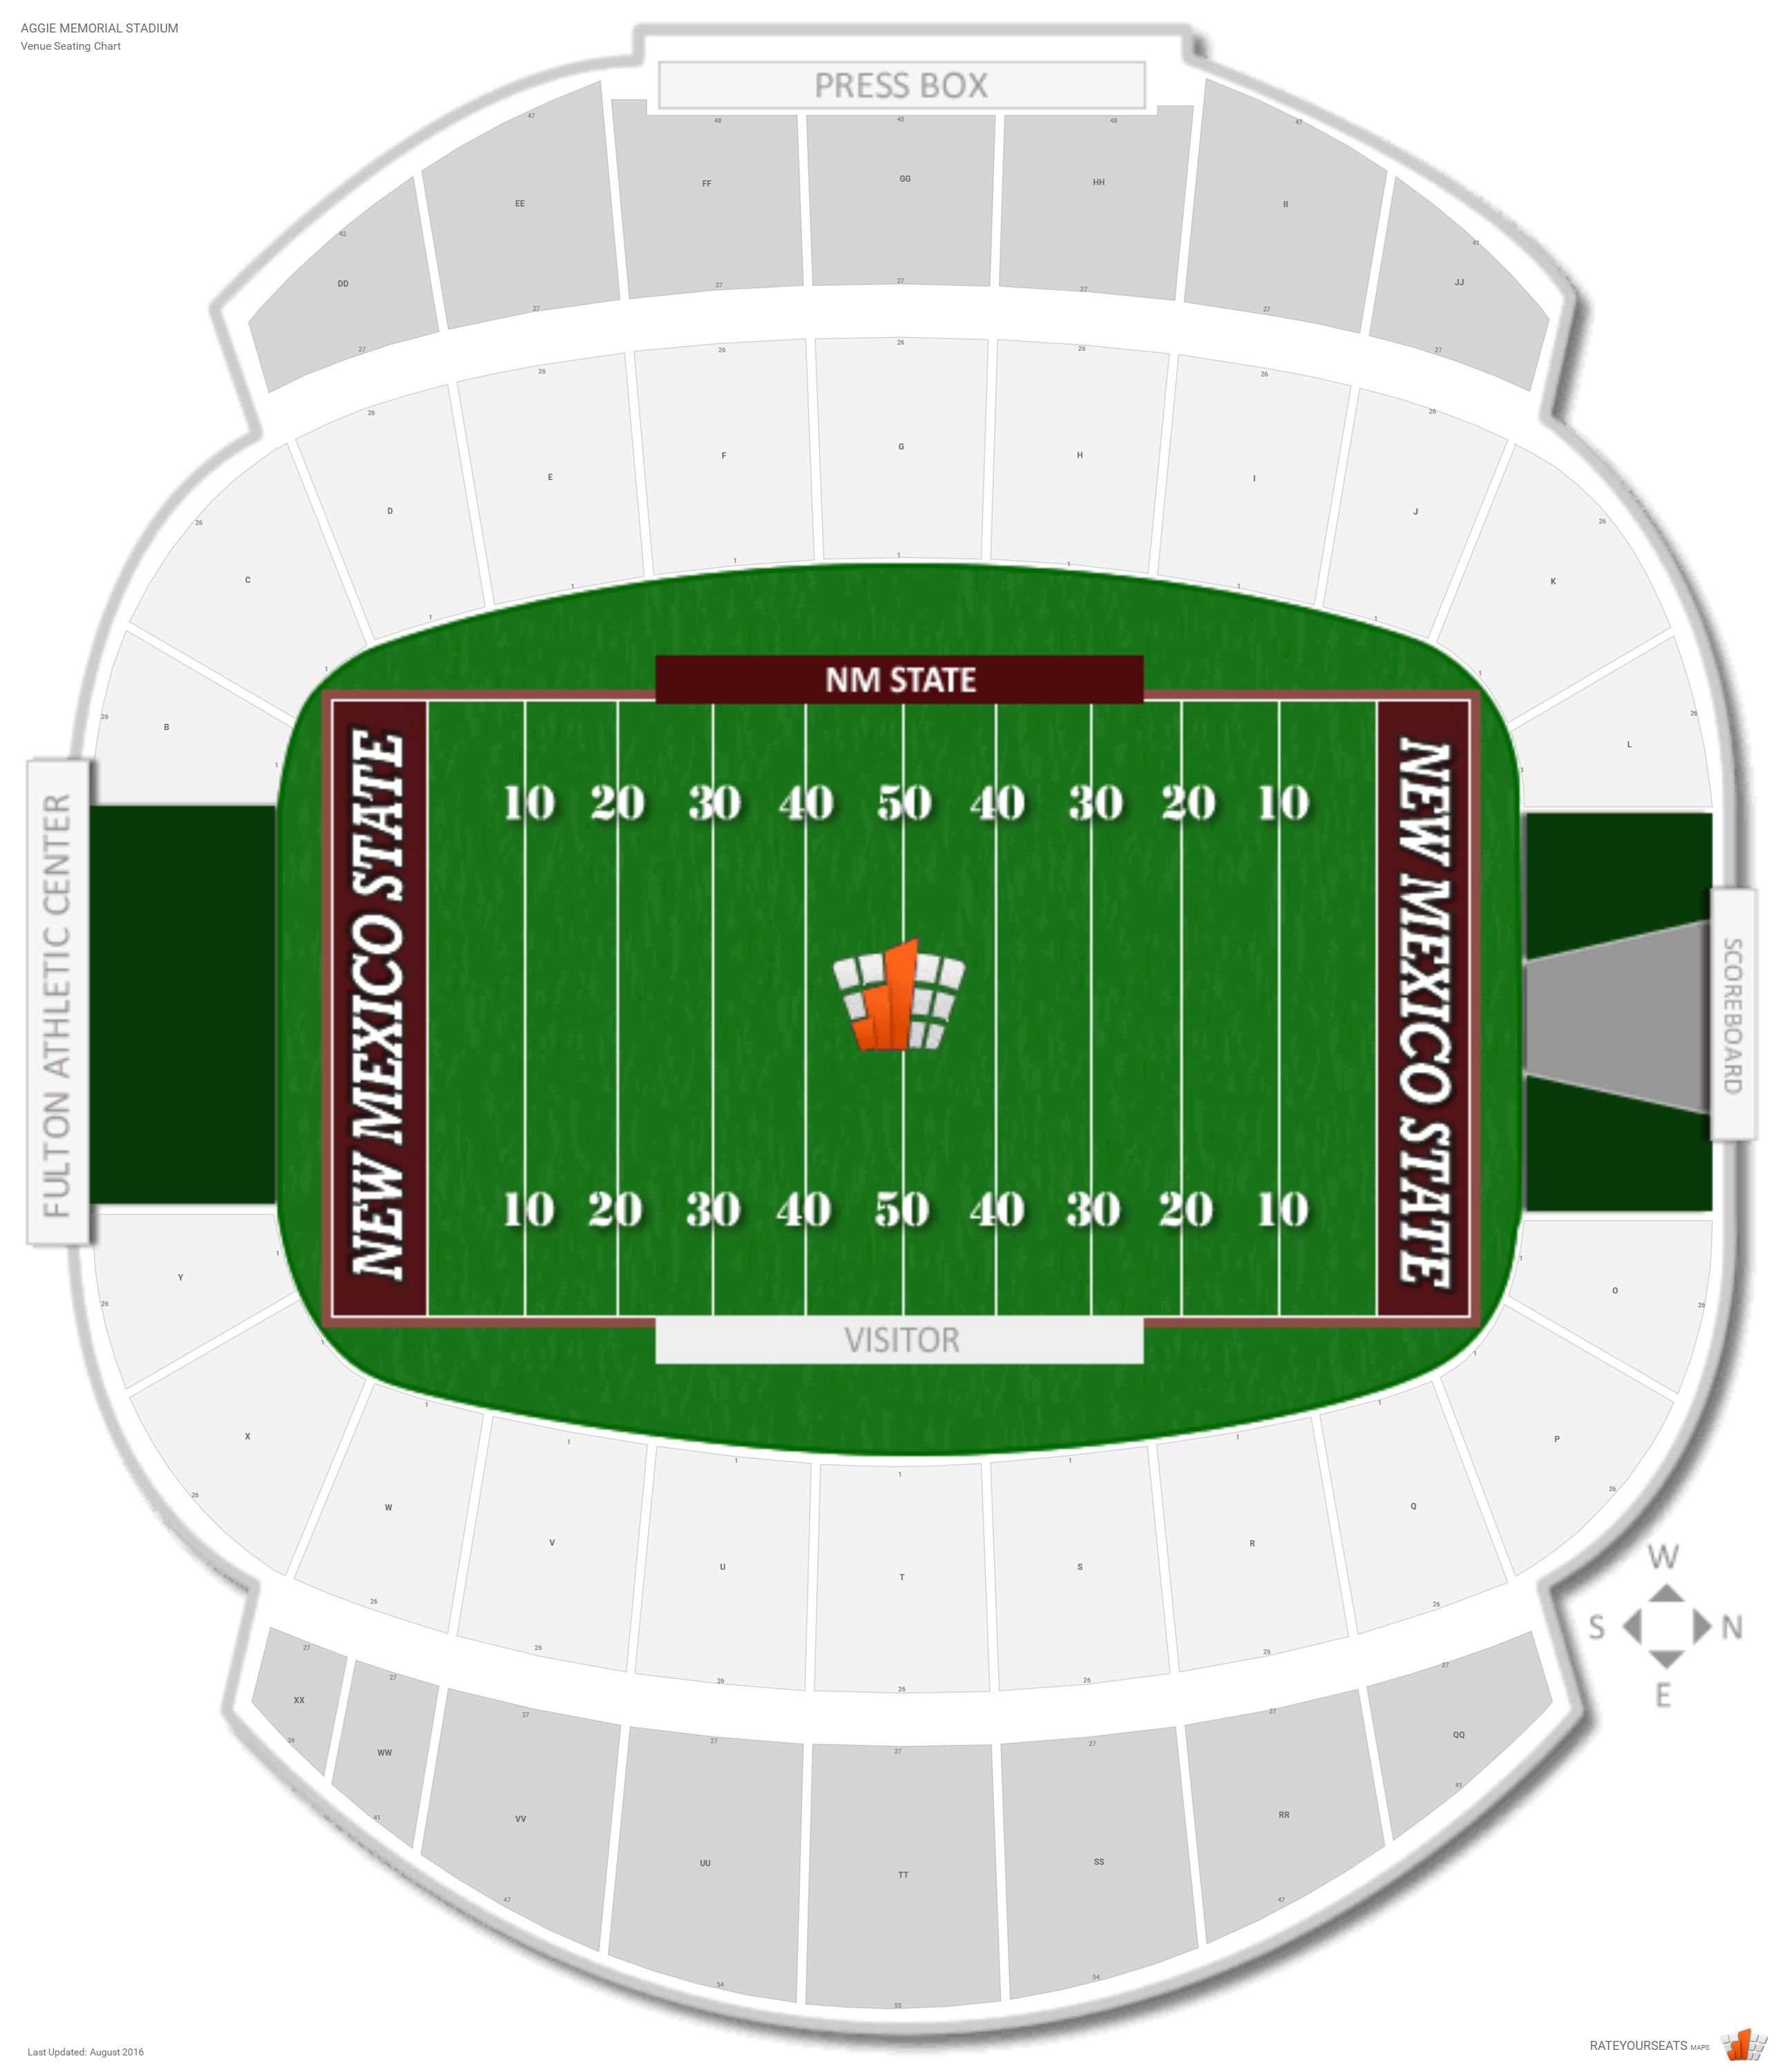 Memorial Stadium Seating Chart With Rows